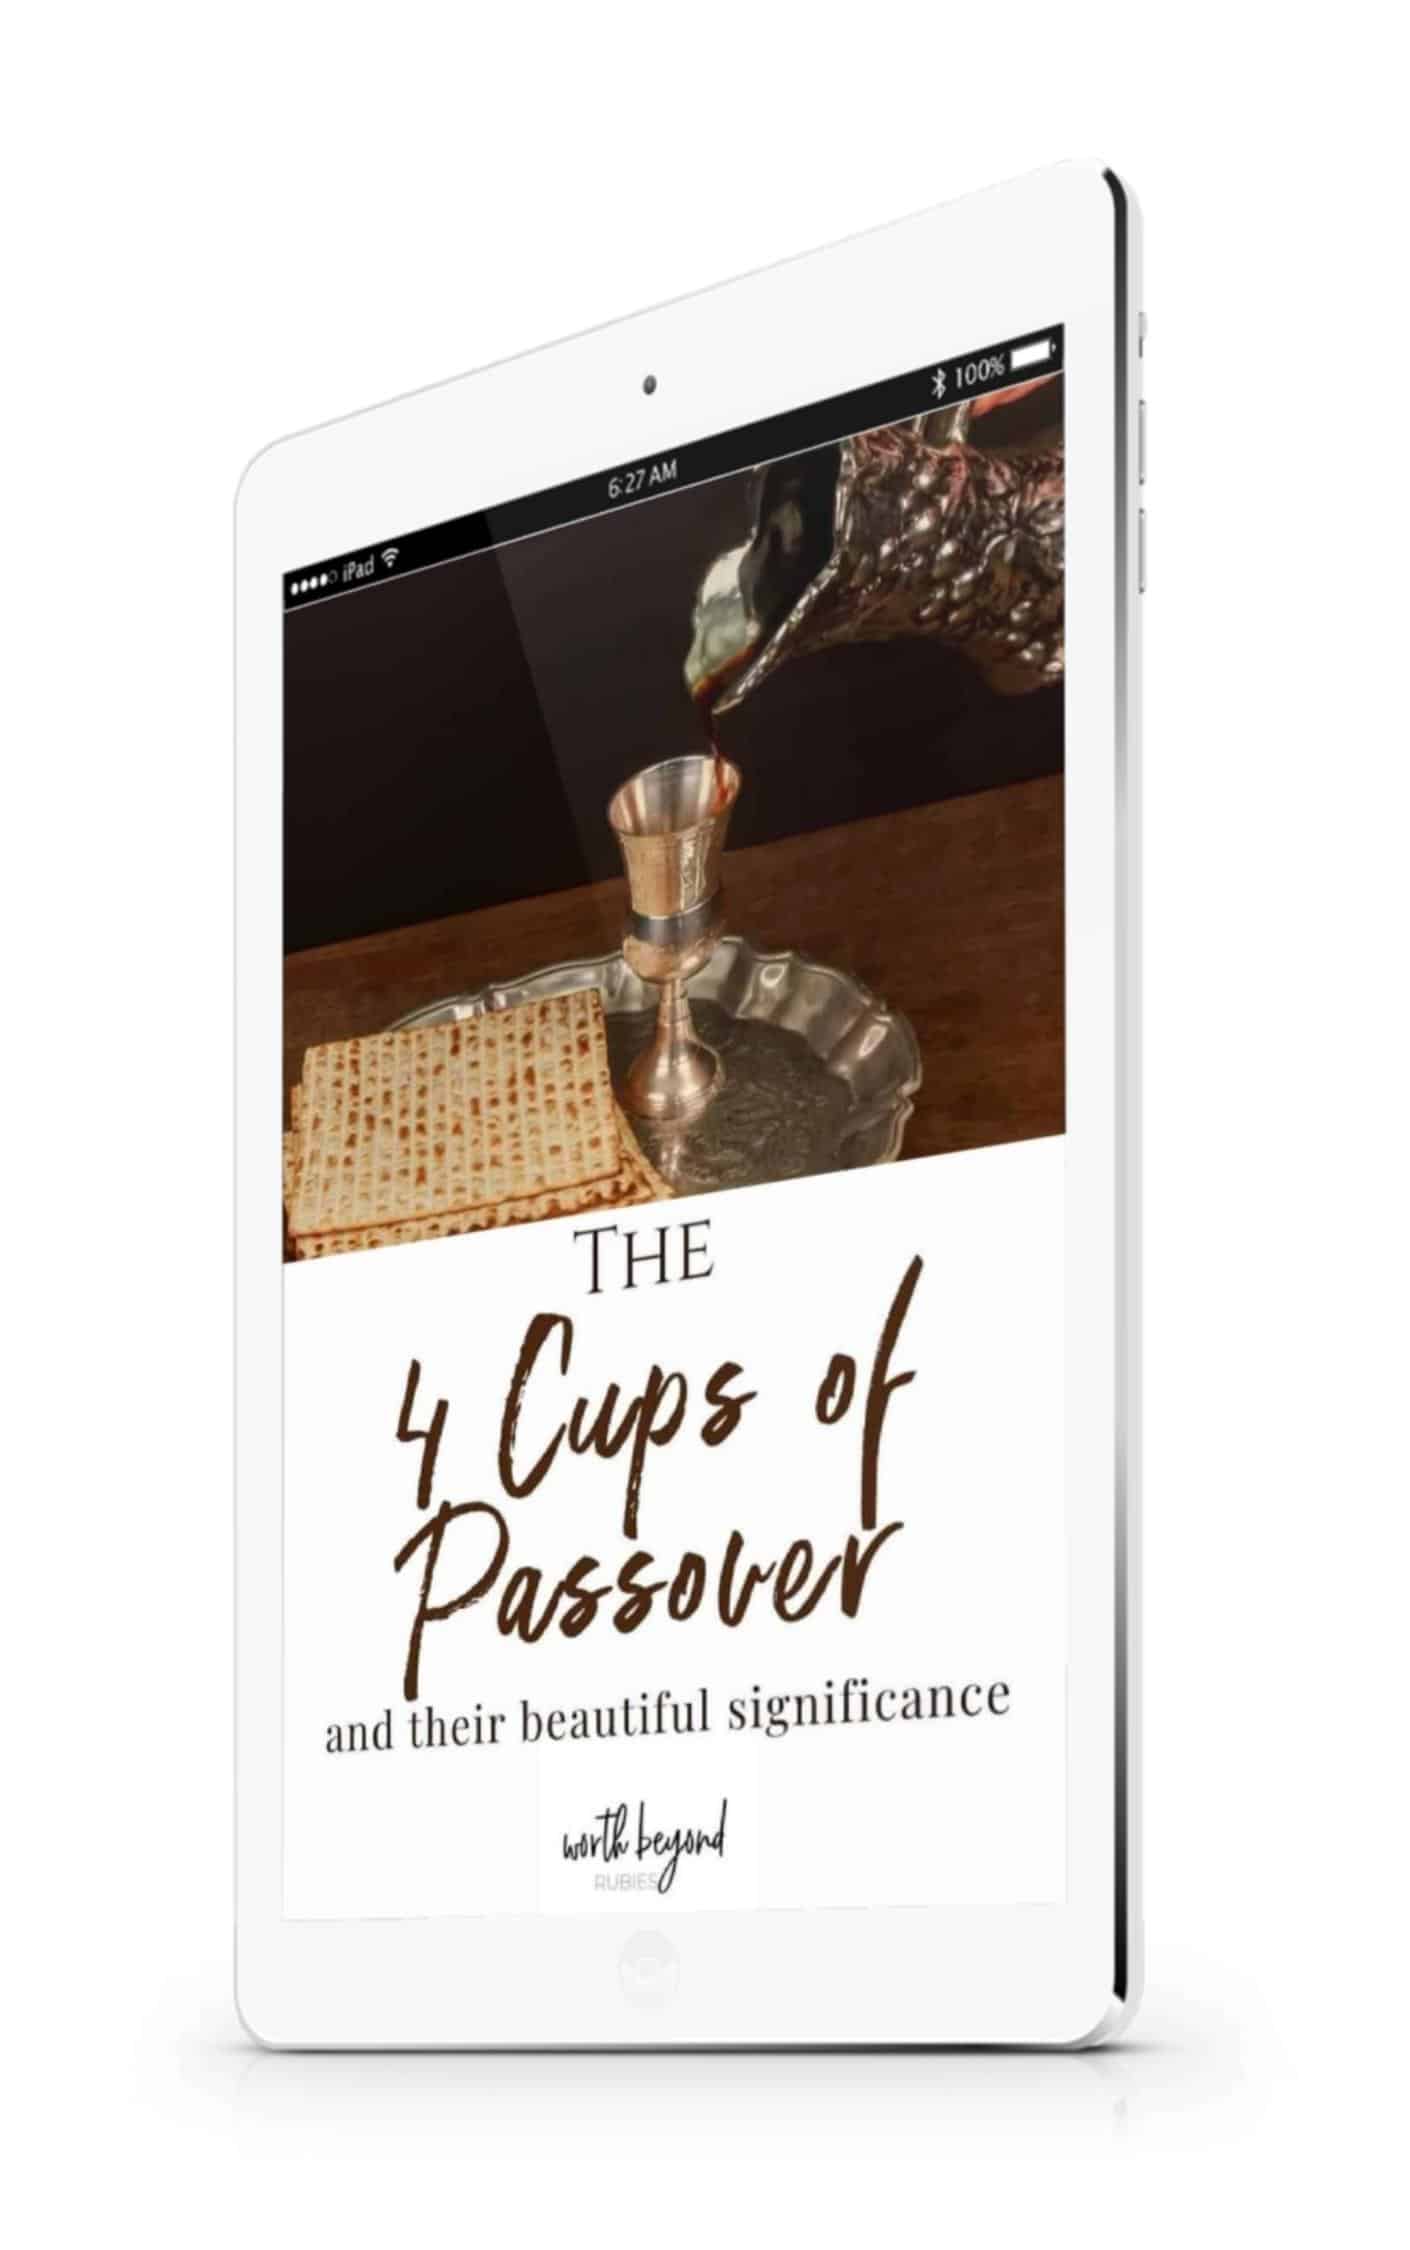 A tablet with an ebook cover on it and text that says E-Books for Christians - The Four Cups of Passover and their Beautiful Significance